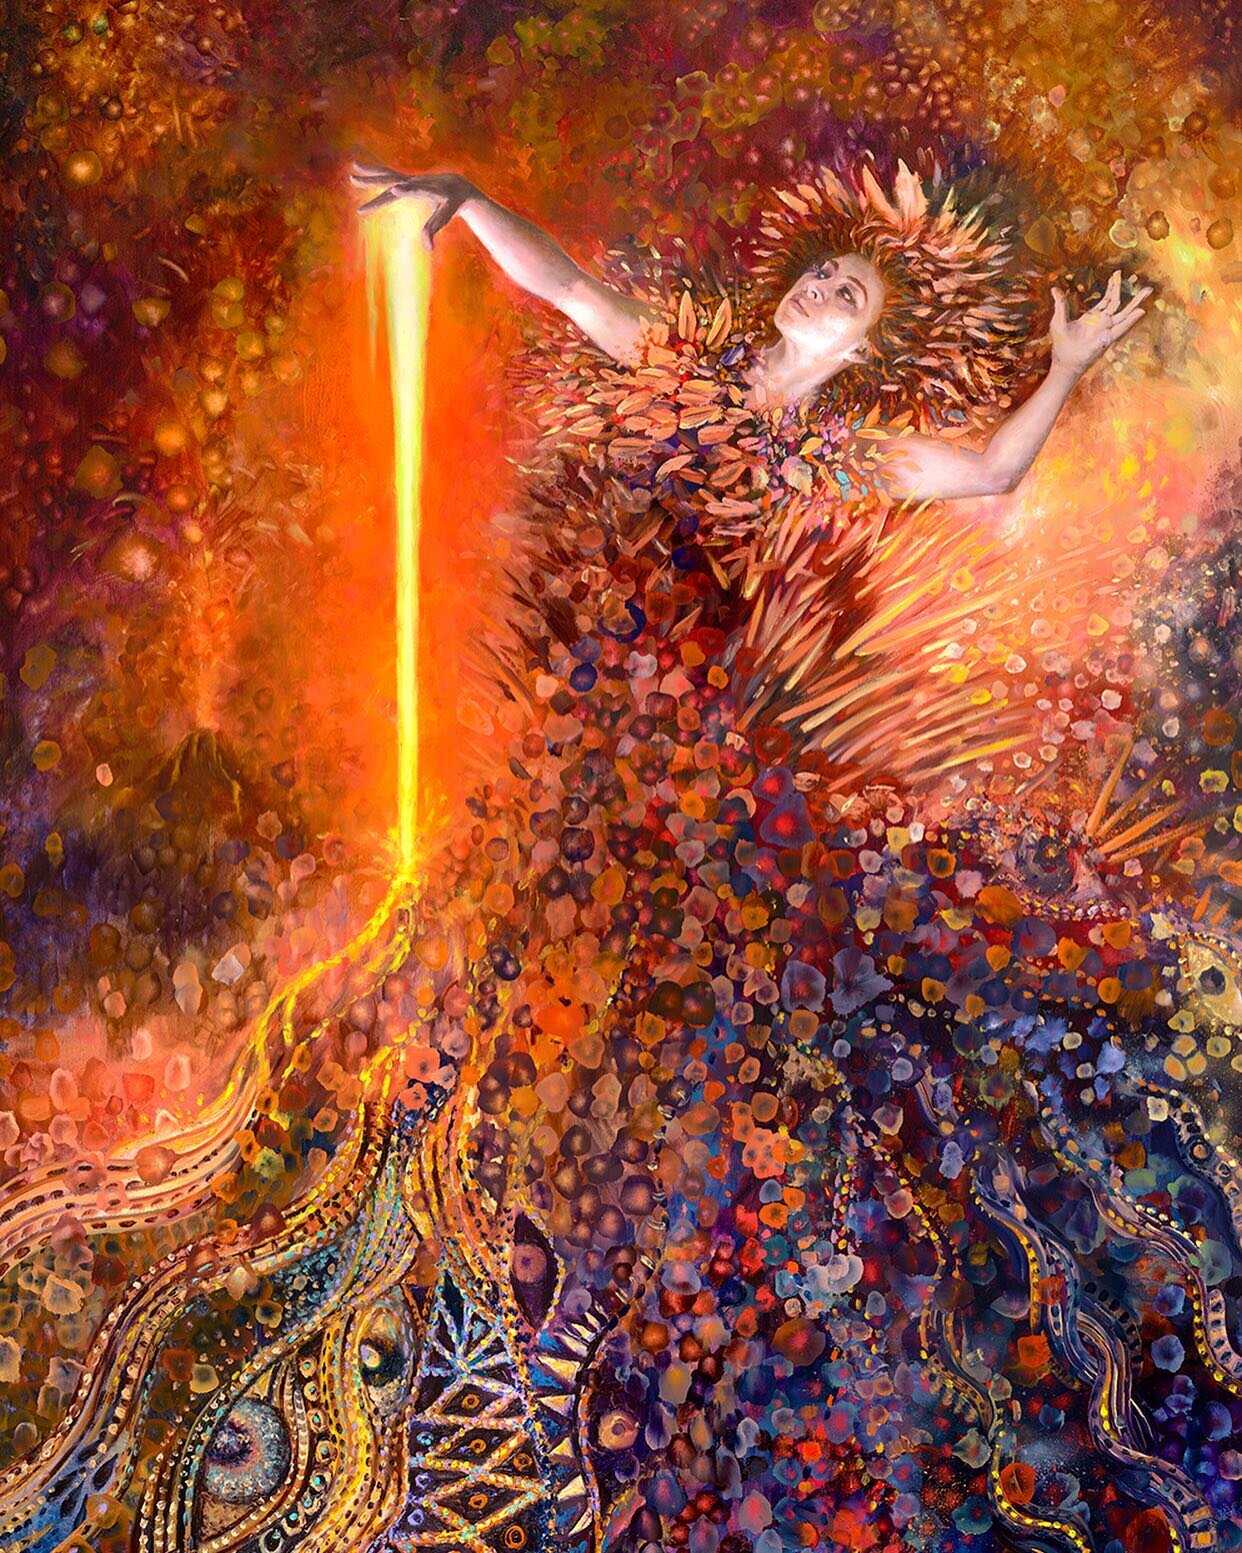 New original! &ldquo;Goddess of Fire&rdquo; 🔥 
 72x48 inch commission. Woohoo!!
Original sold. 

Special thanks to my friend Morika for modeling for this otherworldly #volcano #god. I combined three techniques into this one painting: fingerpainting 